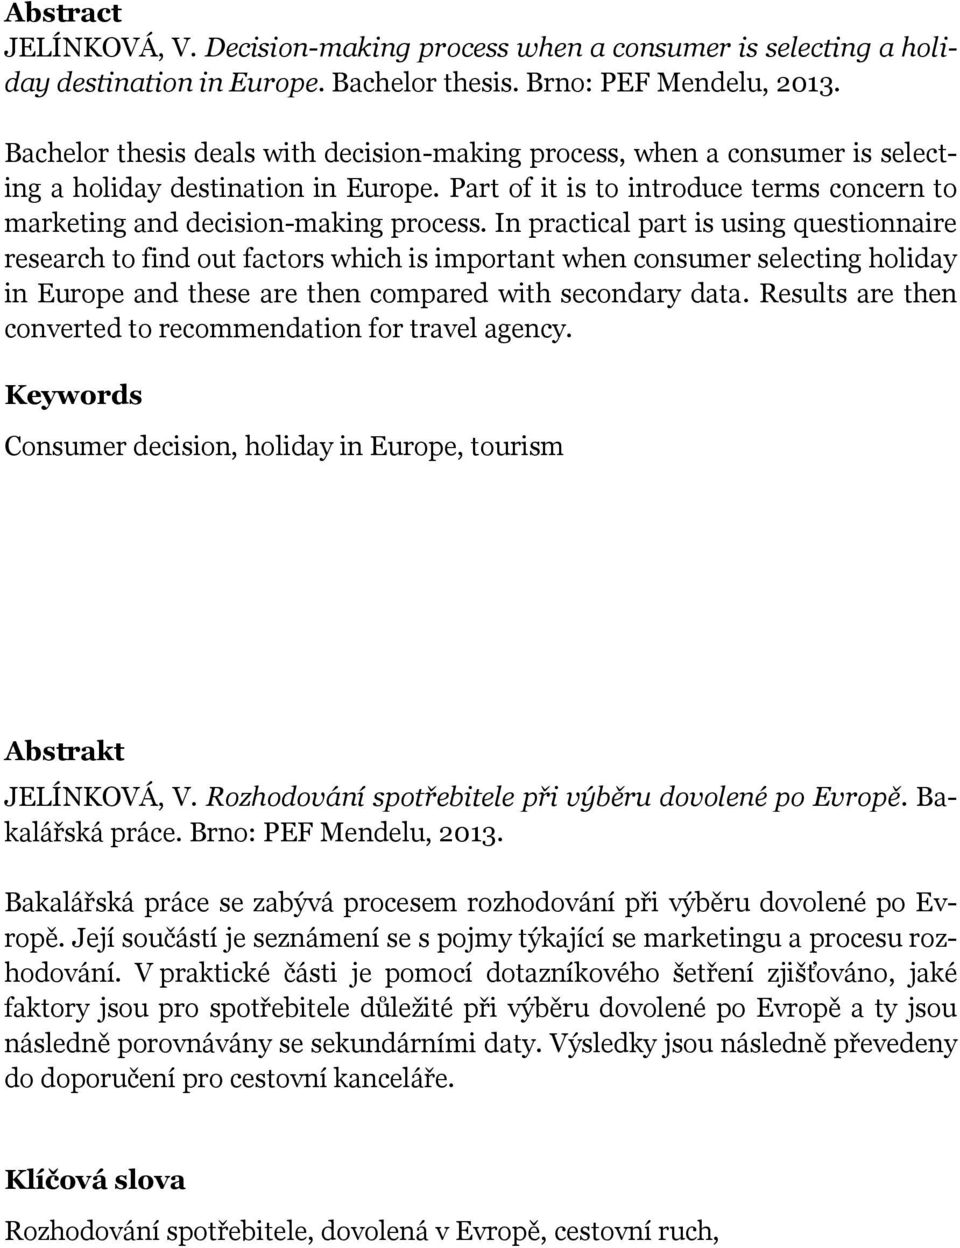 In practical part is using questionnaire research to find out factors which is important when consumer selecting holiday in Europe and these are then compared with secondary data.